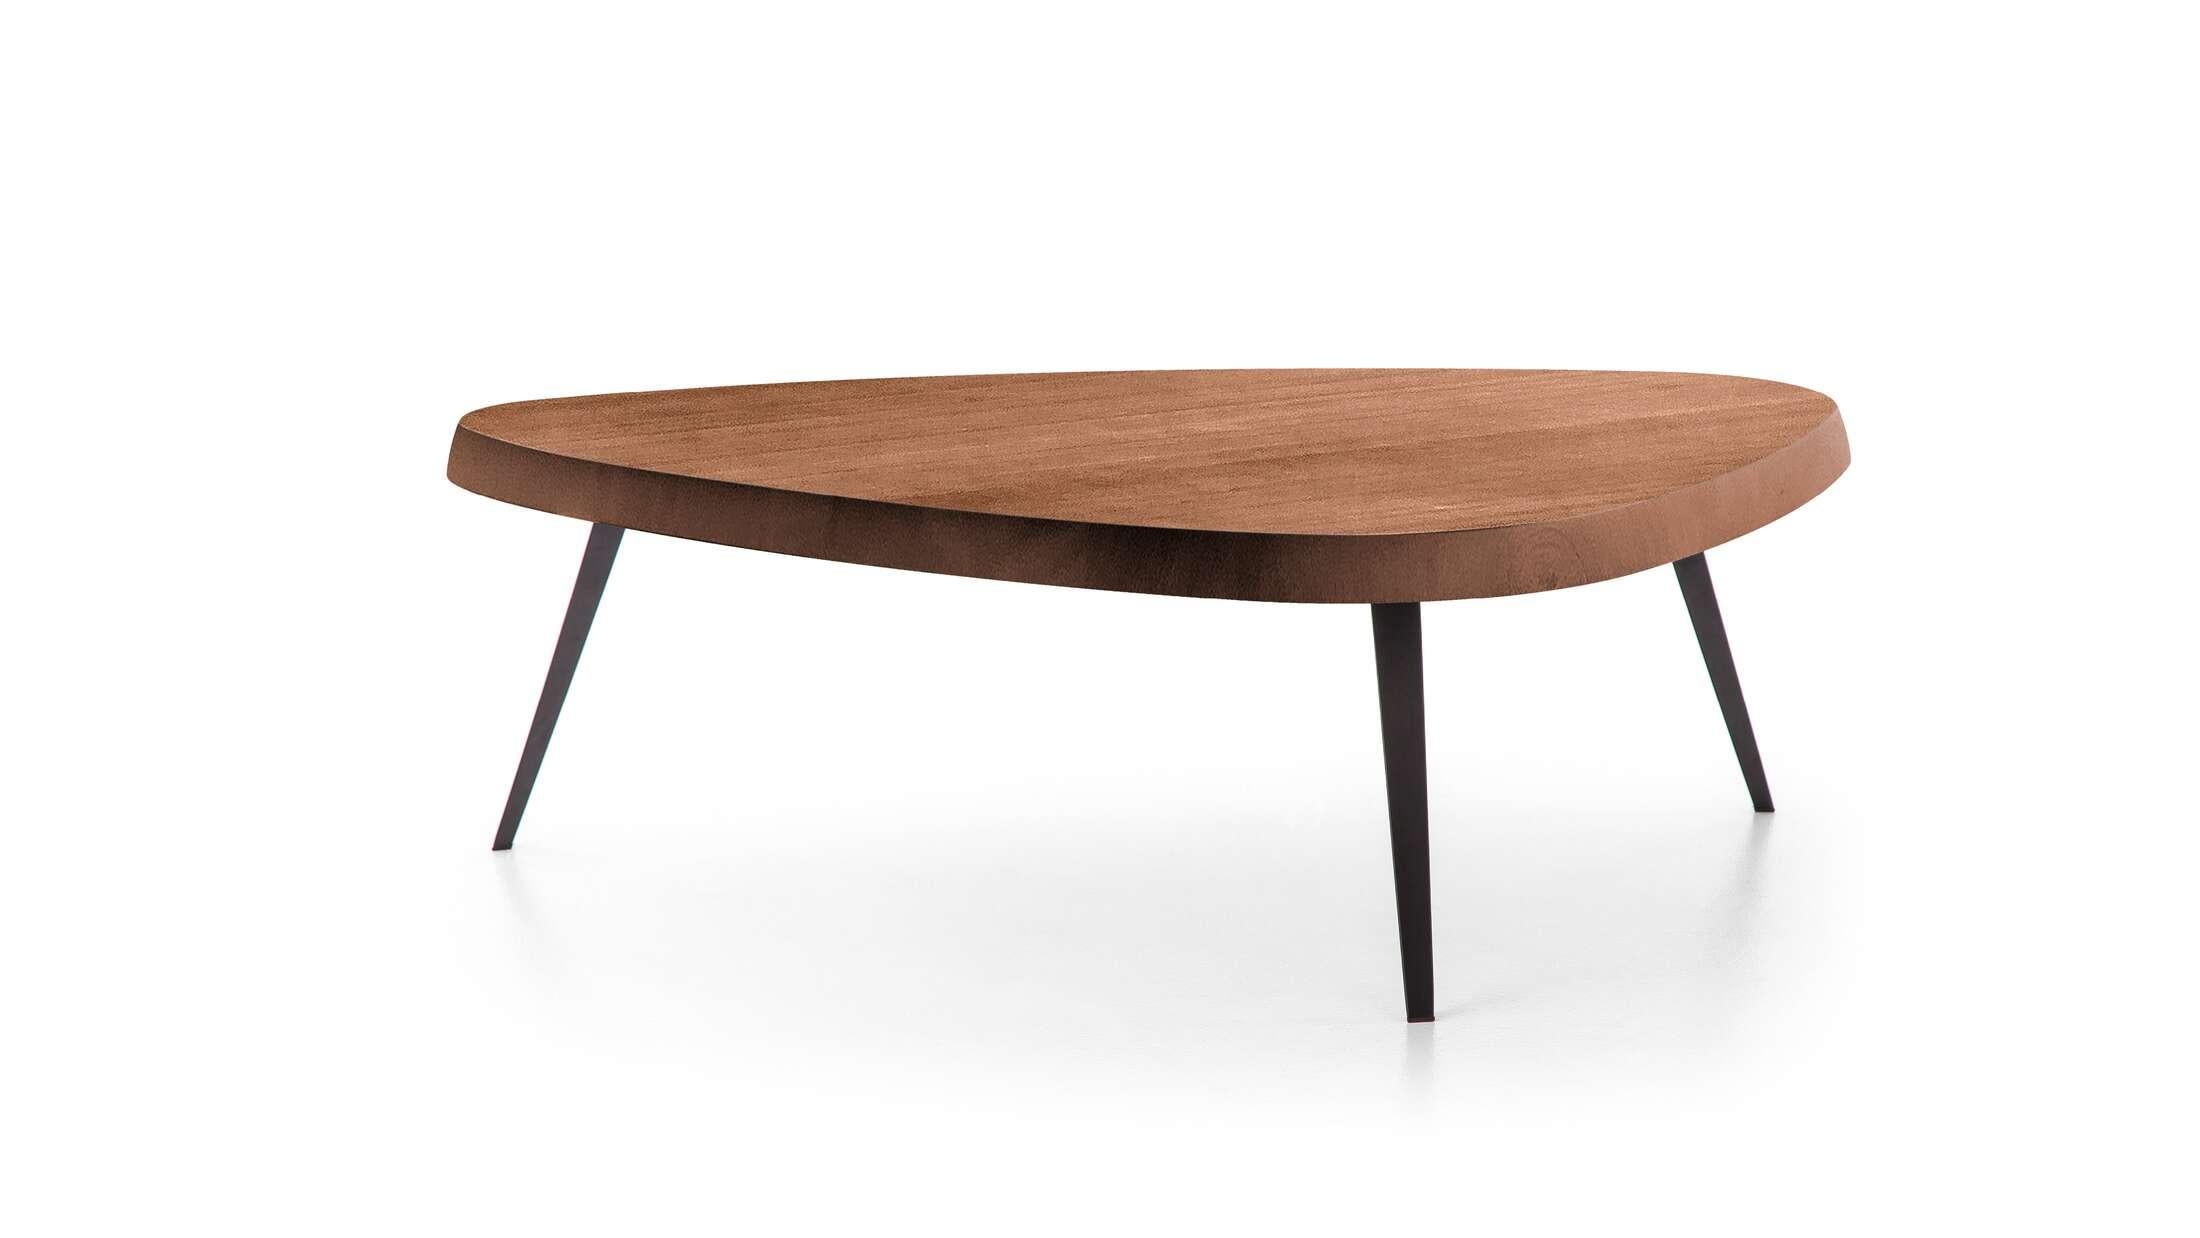 Prices vary dependent on the chosen material. The base is matt anthracite, the top is available in American Walnut, Natural Oak or black stained Oak. 

Table designed by Charlotte Perriand in 1952-1956. Relaunched in 2014. Manufactured by Cassina in